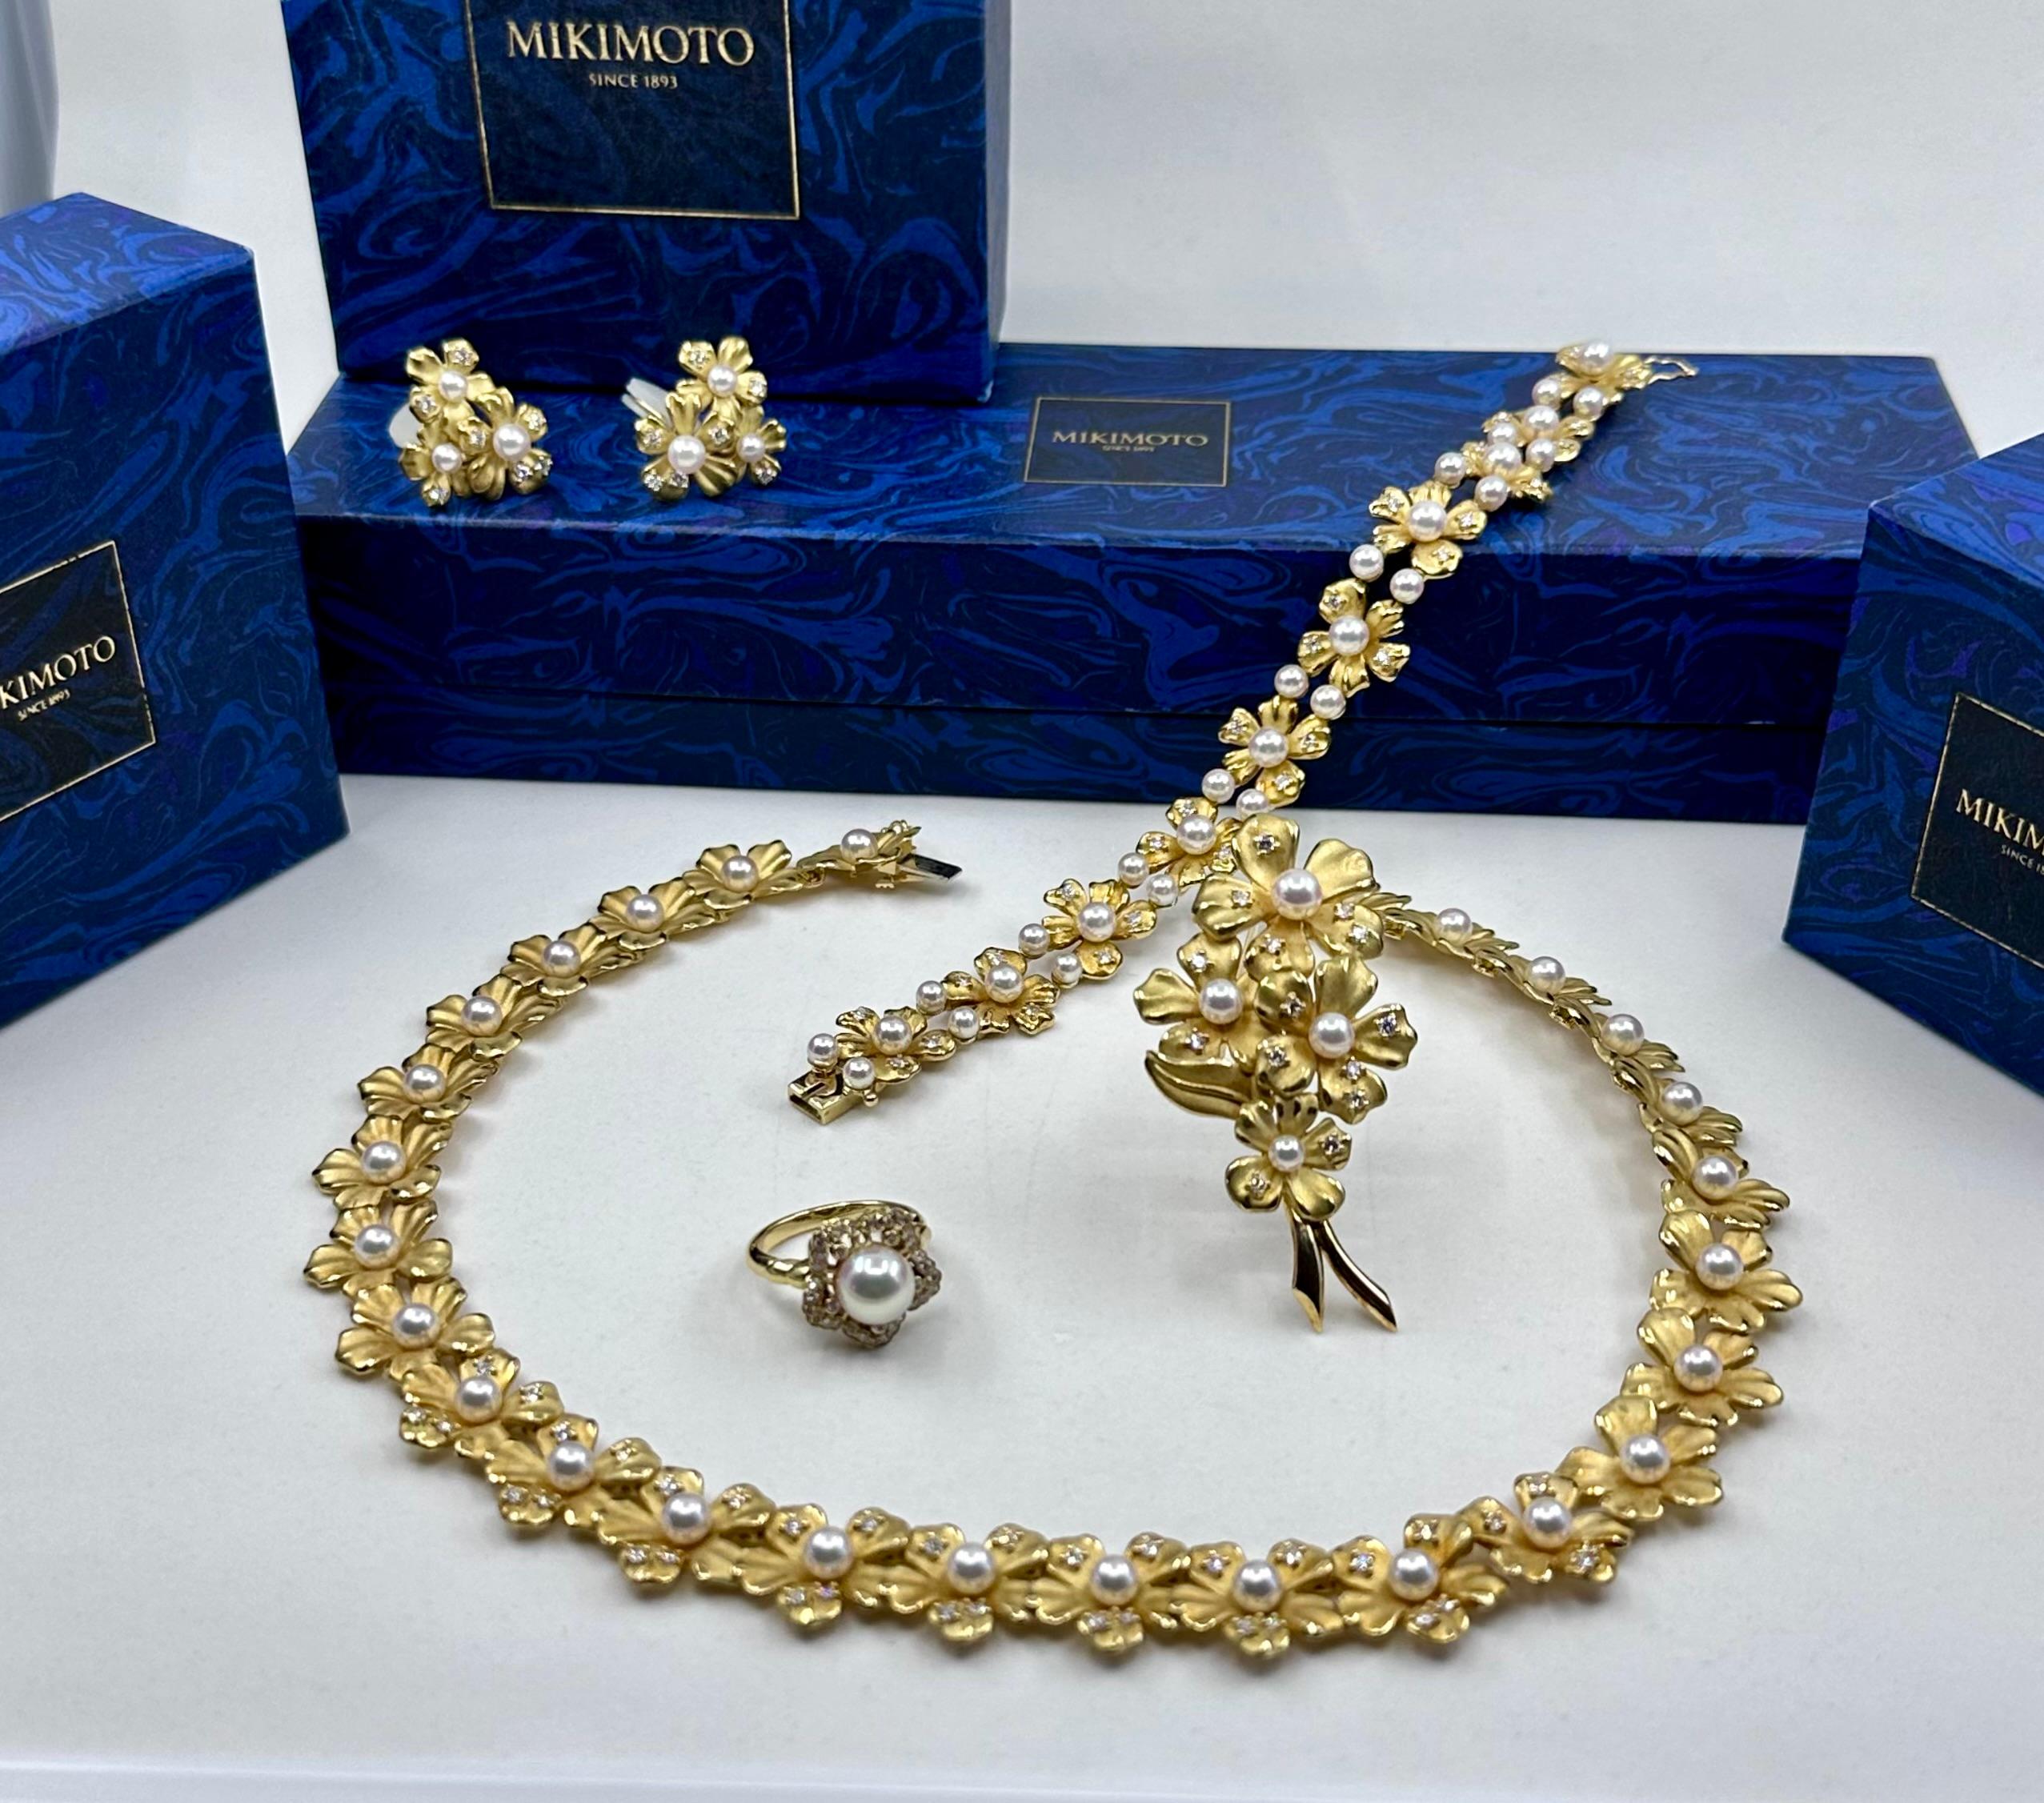 A complete suite of Mikimoto Jewelry
 18 Kt Yellow Gold Diamond and Pearl Necklace Bracelet Earring, Ring and Brooch circa 1960s
Diamonds: 90 Fine D E Color Diamond 3.50 cts Total Weight
Gram Weight 153 g of 18k Gold 
Necklace is 17 inch